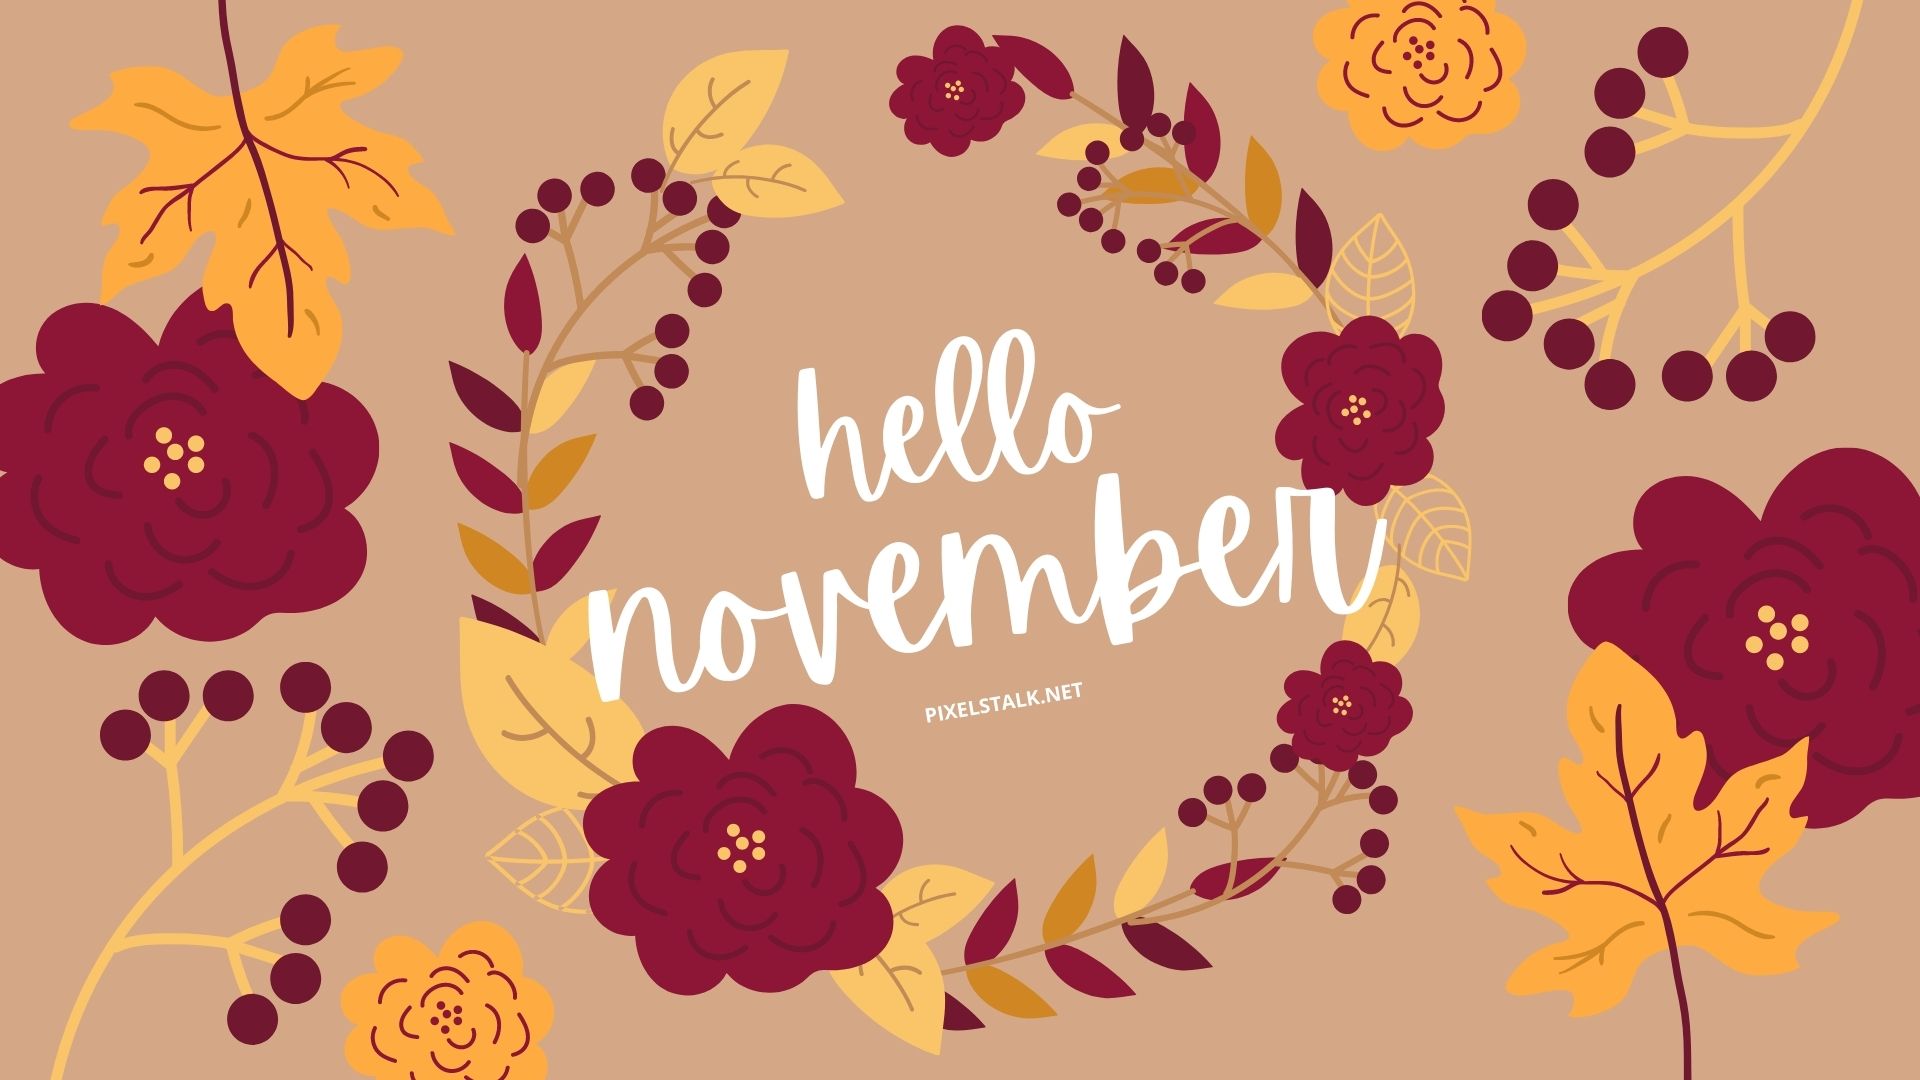 November backgrounds for desktop cute and aesthetic wallpapers